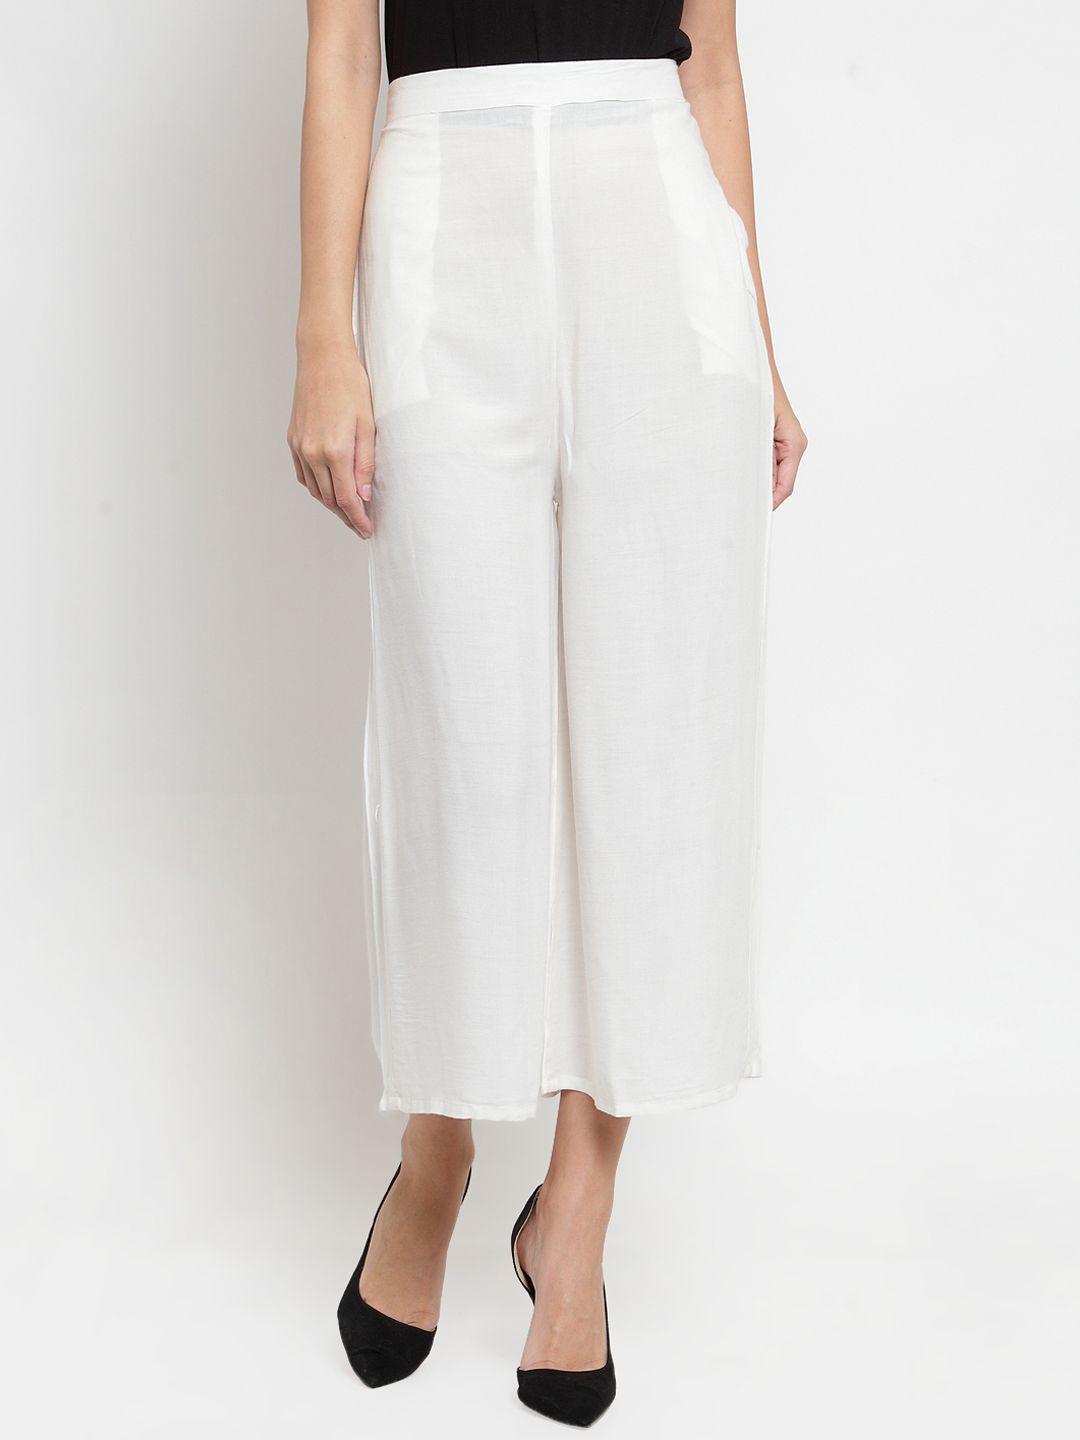 clora creation women off-white regular fit solid culottes